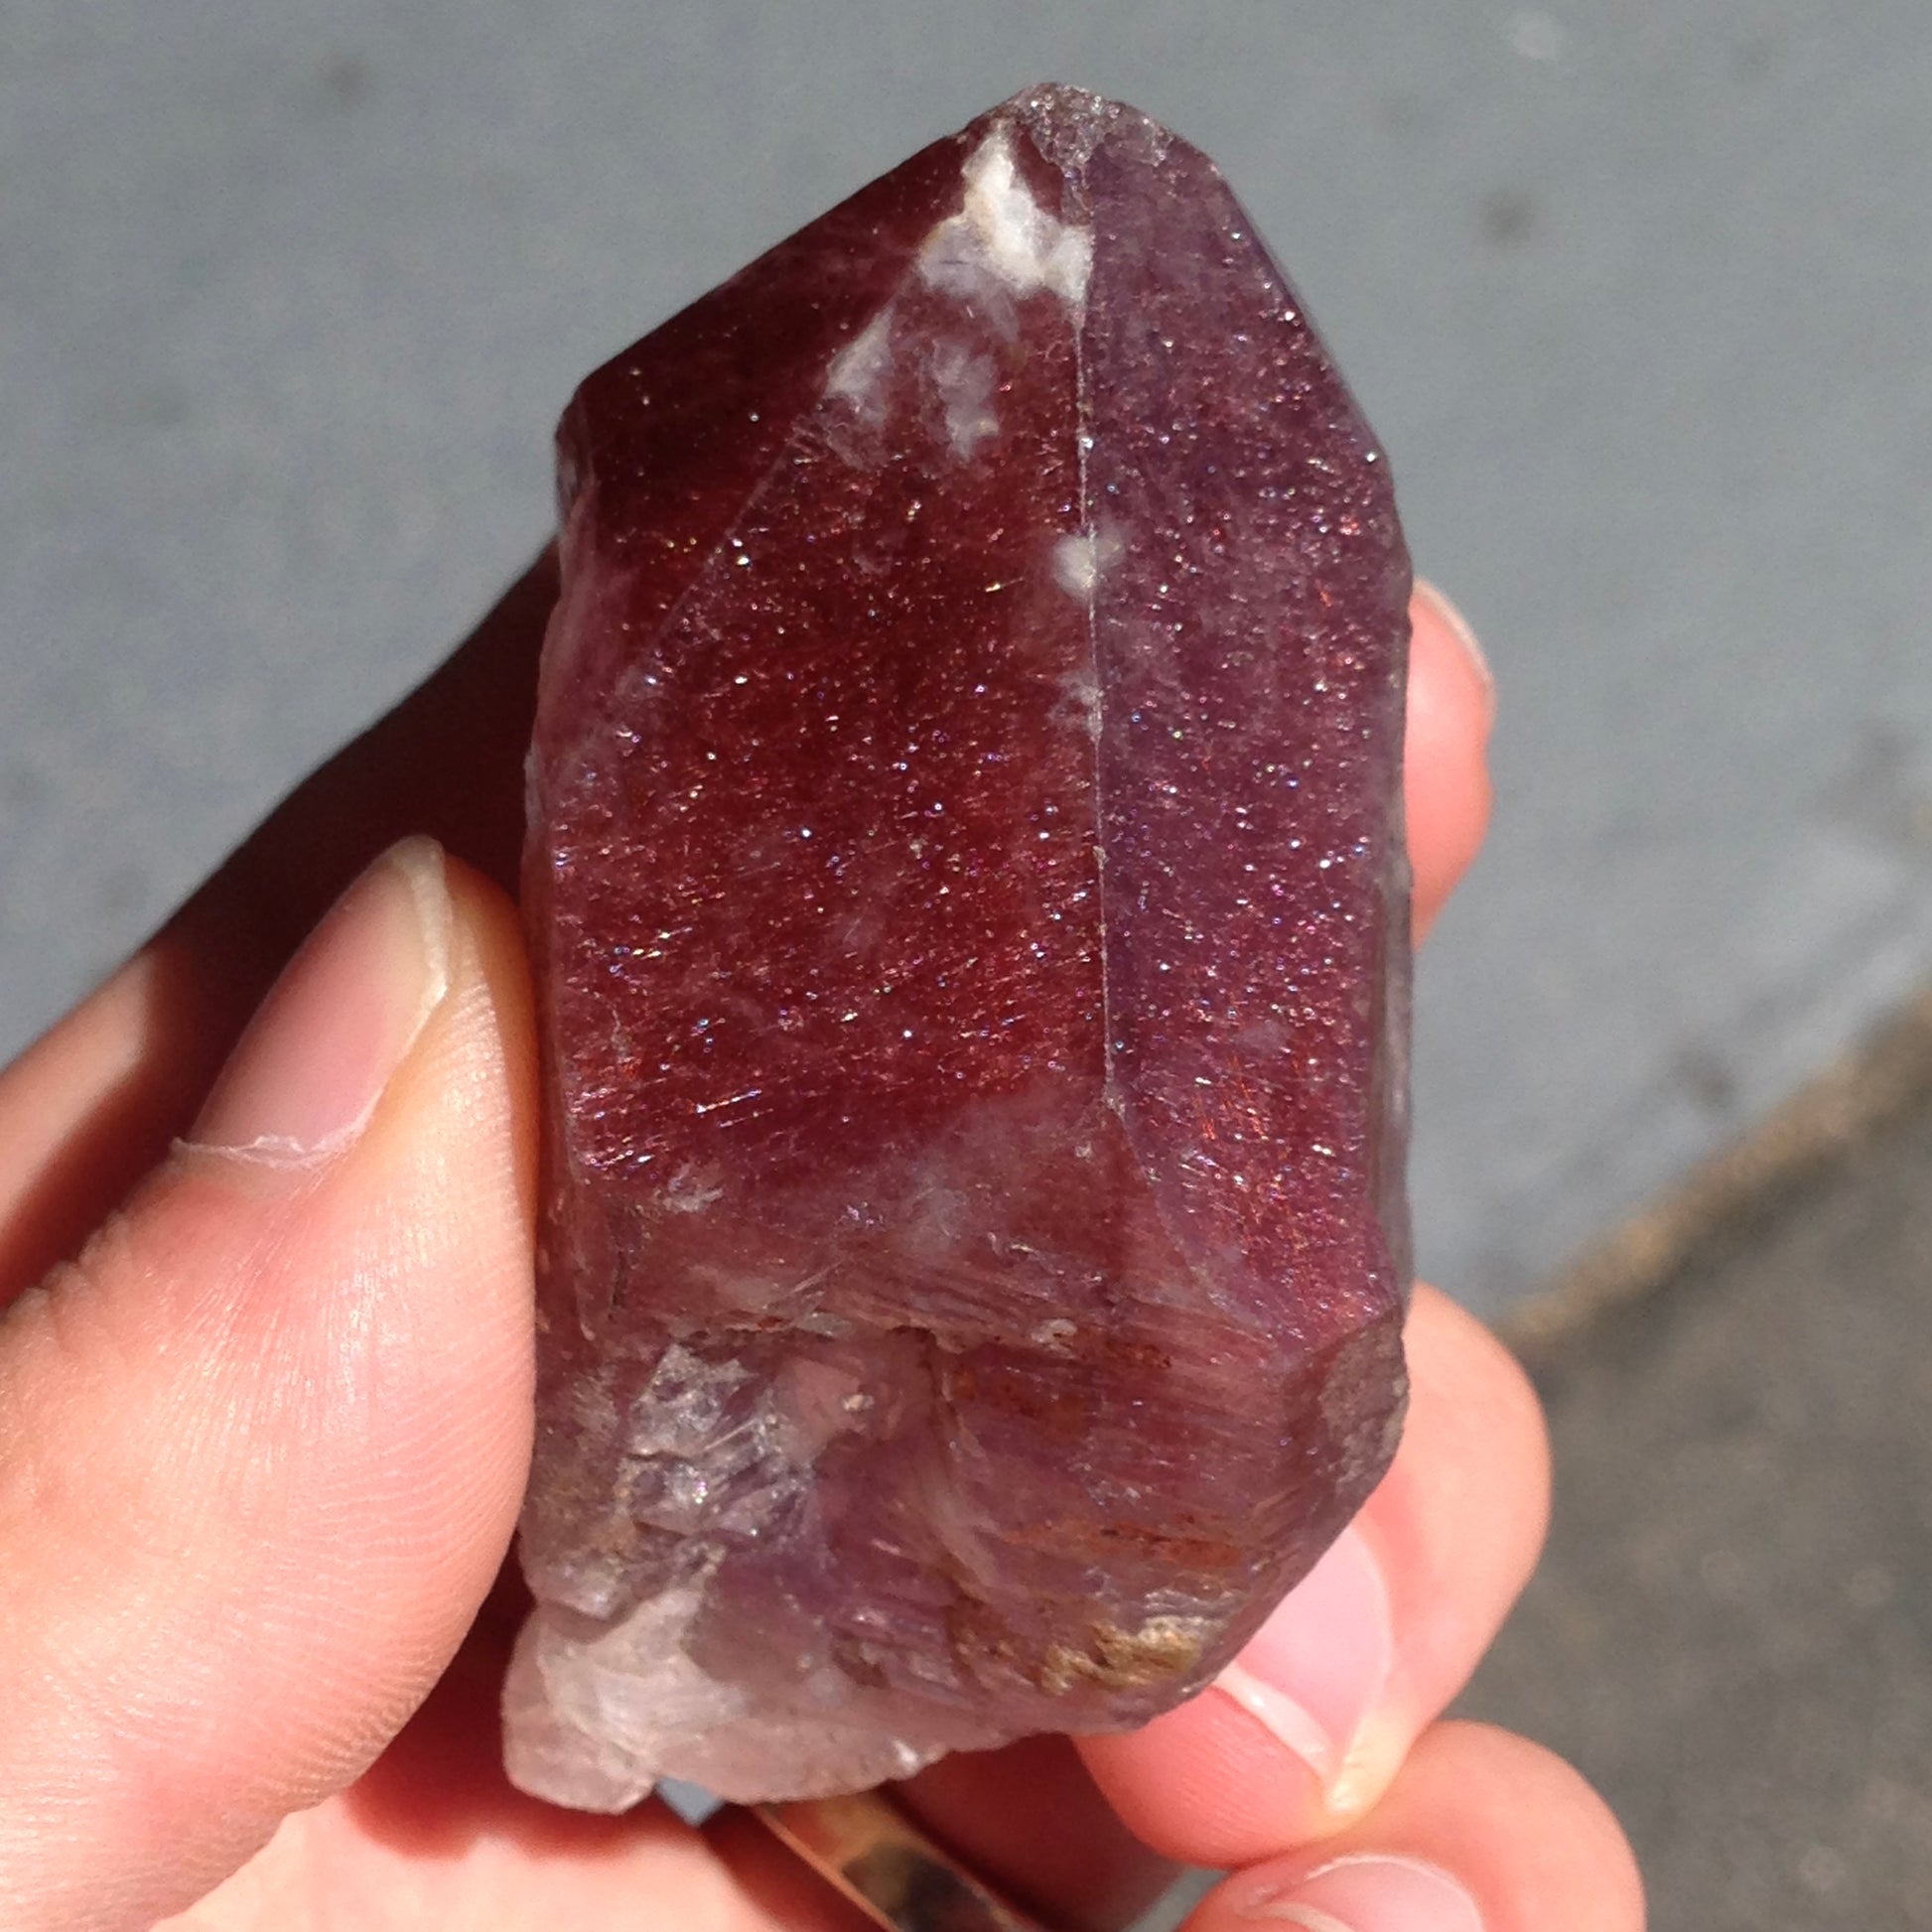 A red amethyst crystal from Mexico colored with the inclusions lepidocrocite and hematite inclusions.